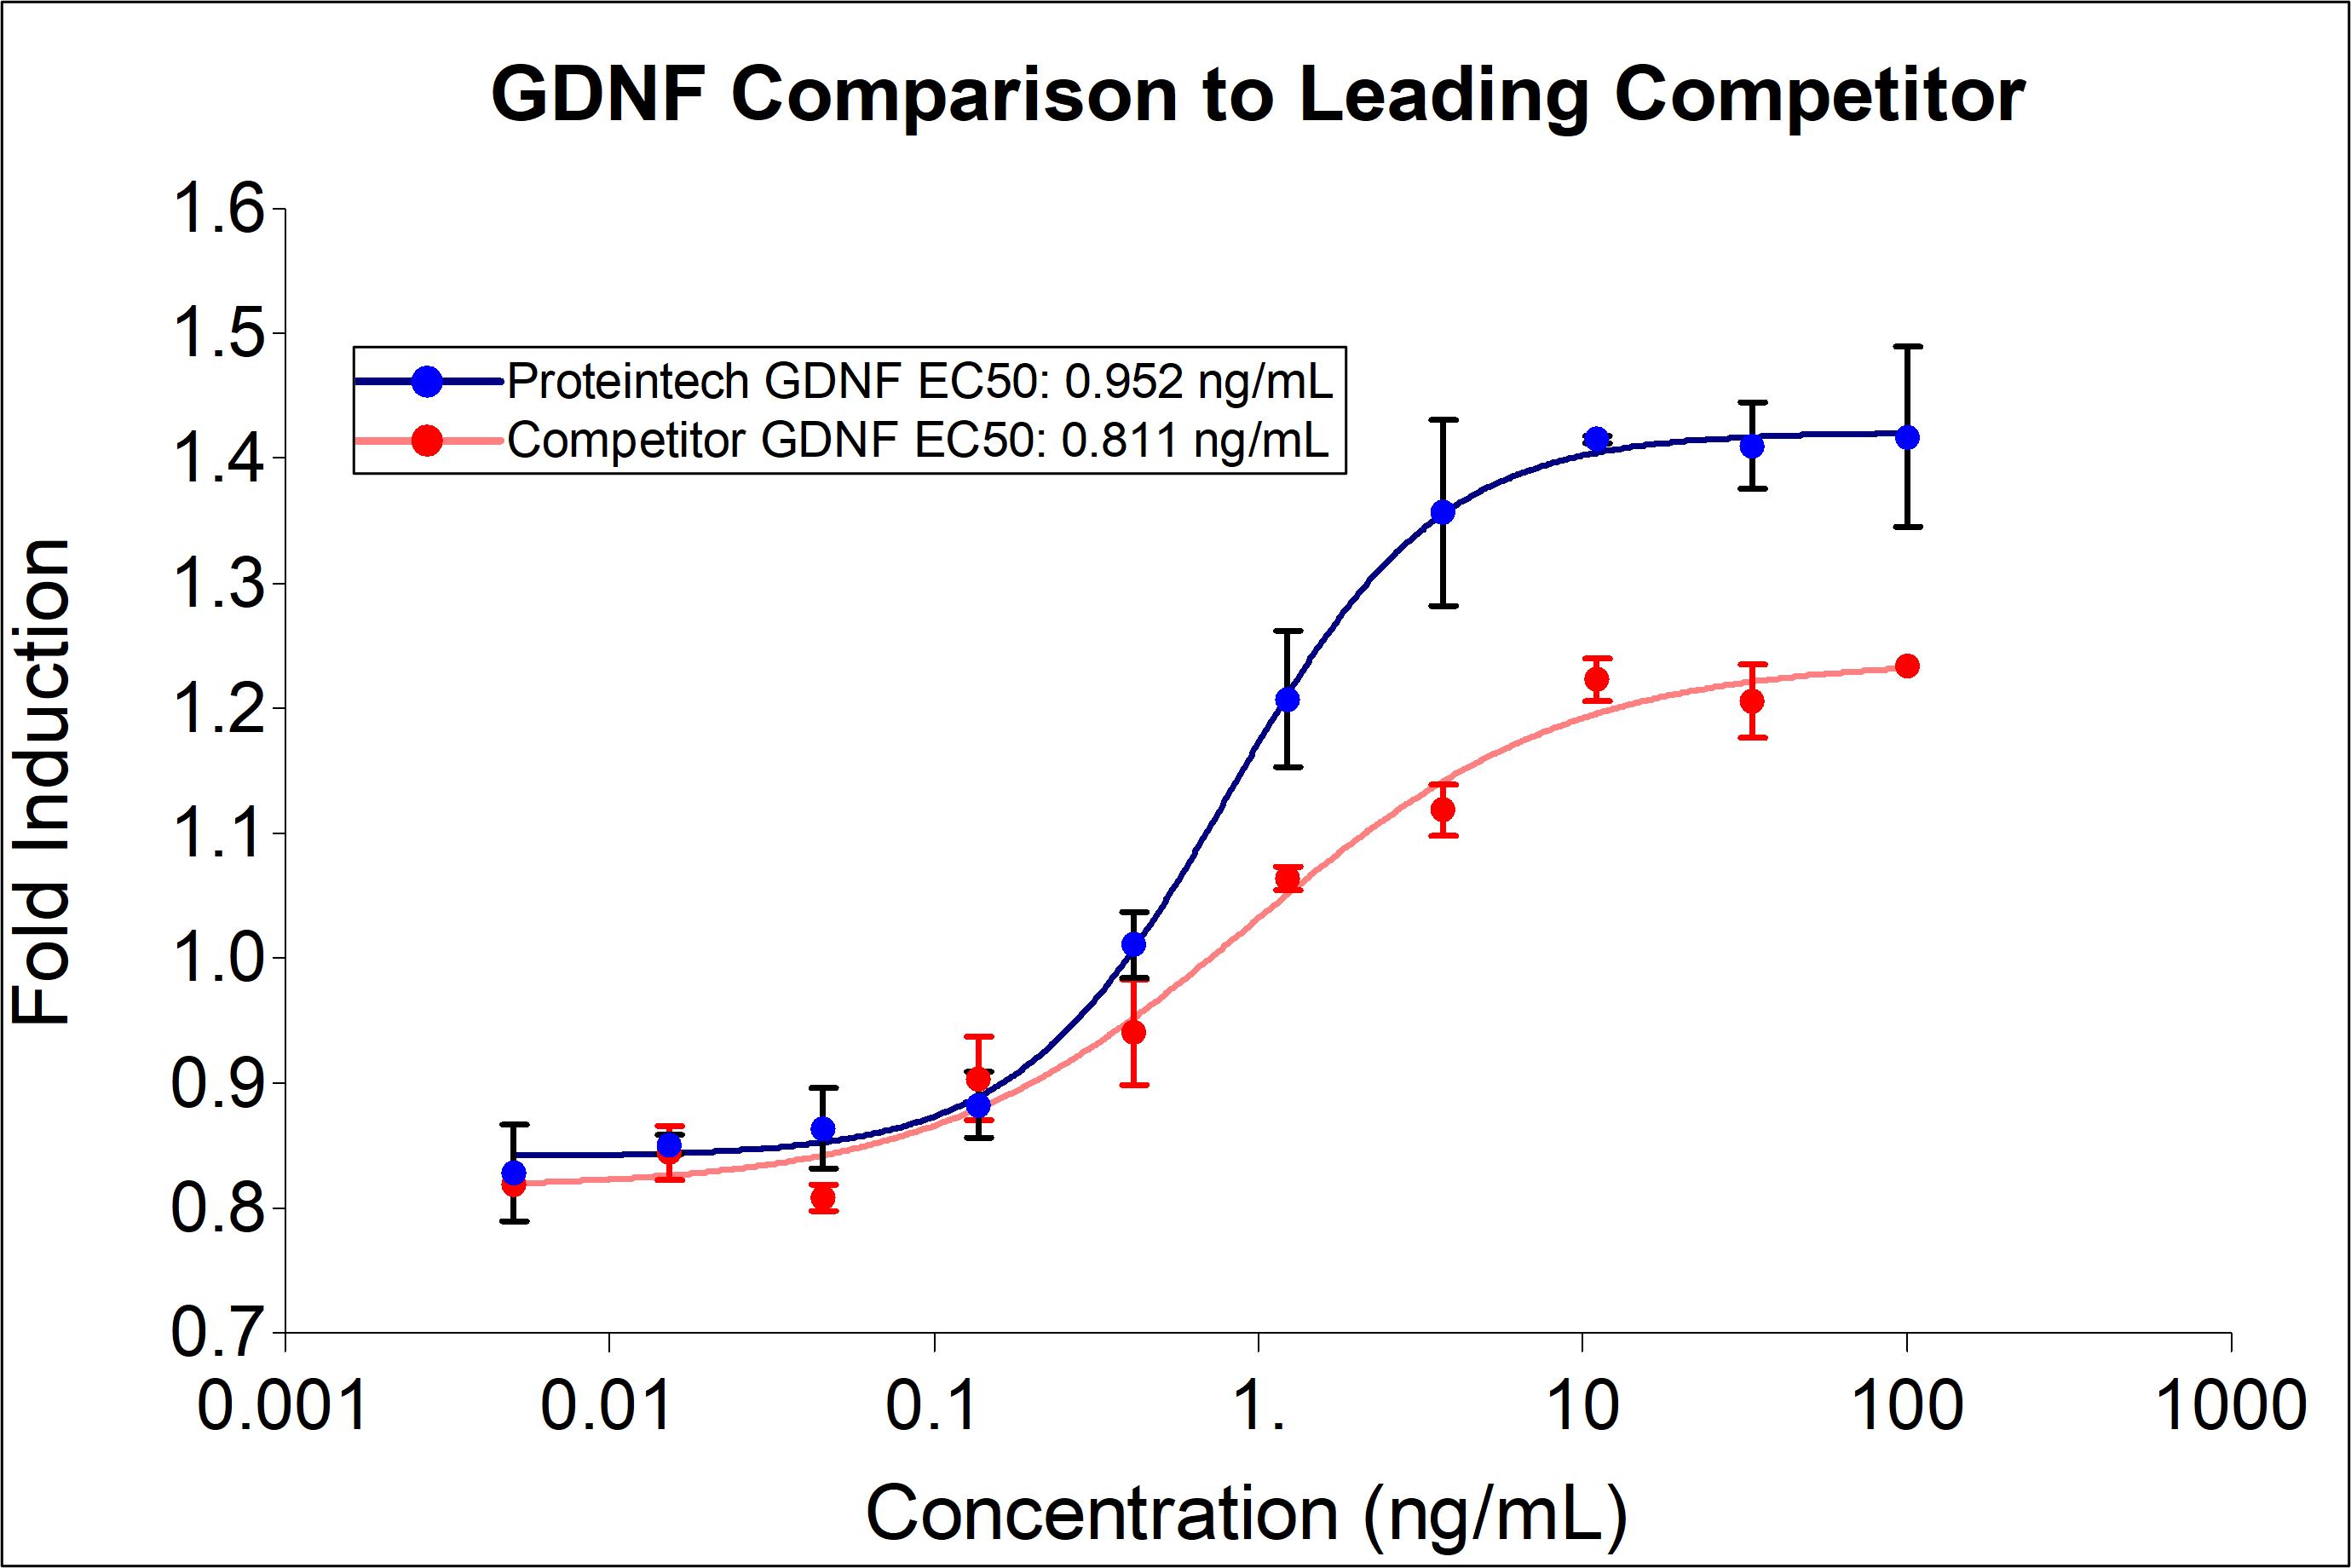 Proteintech GDNF (HZ-1311) demonstrates a greater fold induction of proliferation compared to a leading competitor at an equivalent EC50.  GDNF stimulates dose-dependent proliferation of the SH-SY5Y Neuroblastoma cell line. SH-SY5Y cells were treated with increasing concentrations of recombinant GDNF for 72 hours in the presence of 100 ng/mL GFR alpha-1. Viable cell number was quantitatively assessed by PrestoBlue® Cell Viability Reagent. The EC50 was determined using a 4-parameter non-linear regression model. The EC50 range is < 10 ng/mL.